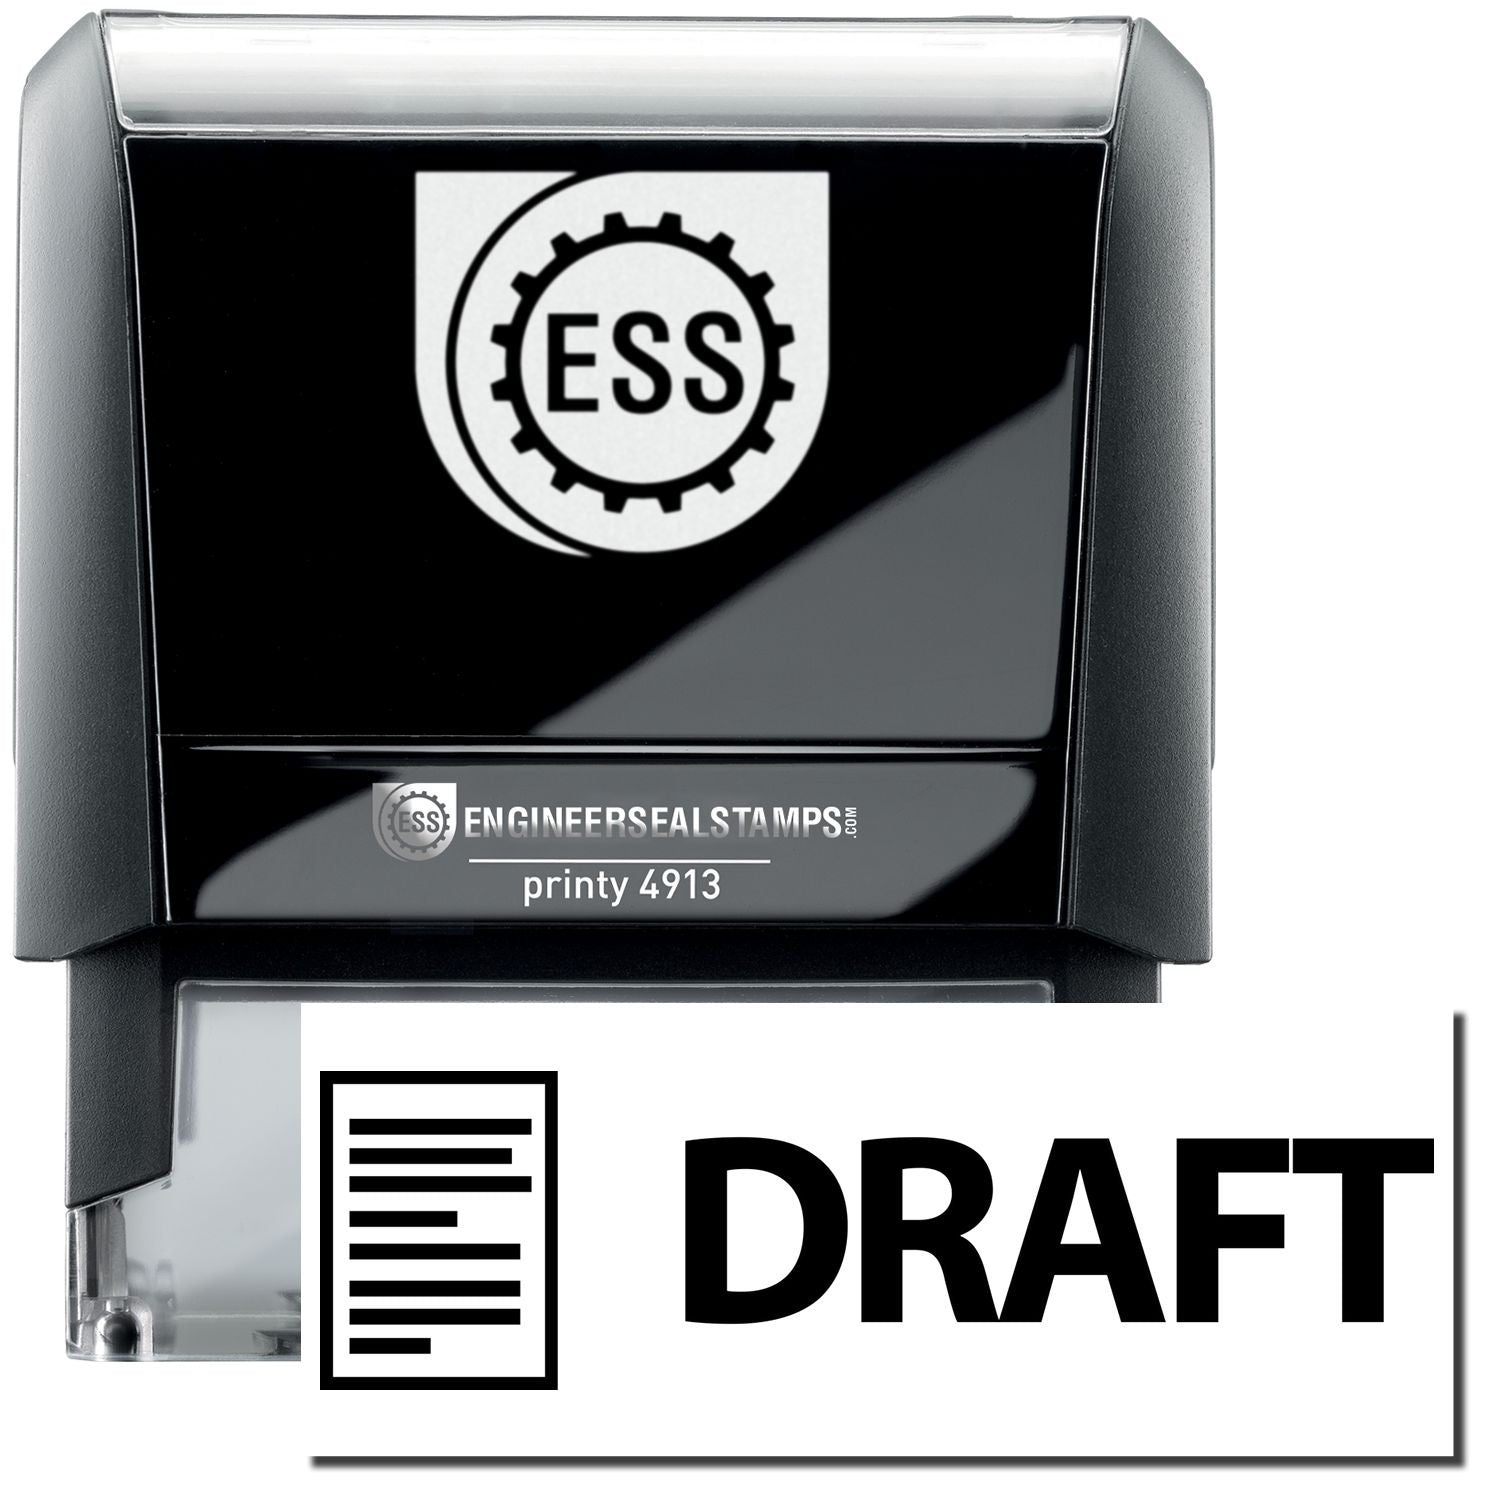 A self-inking stamp with a stamped image showing how the text "DRAFT" in an eye-catching font with an image of a letter is displayed by it after stamping.